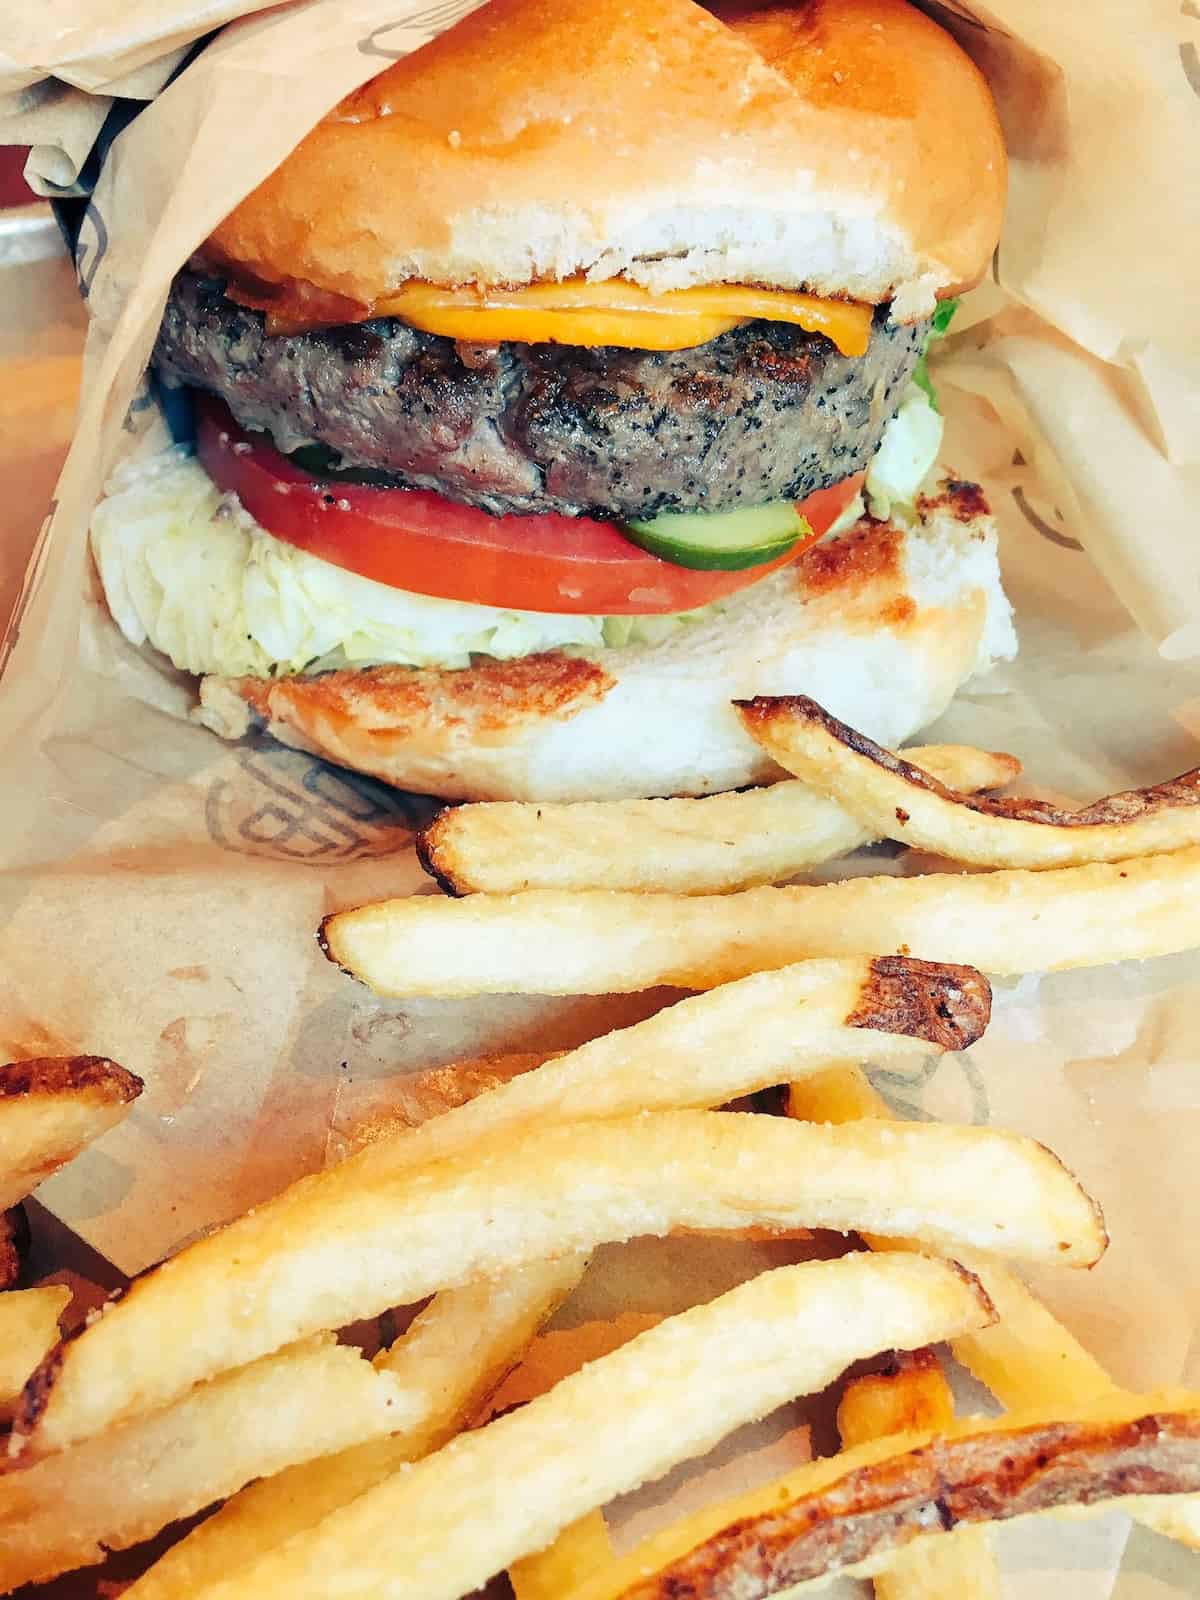 Cheeseburger with tomato, lettuce, and pickles with French fries wrapped in paper.